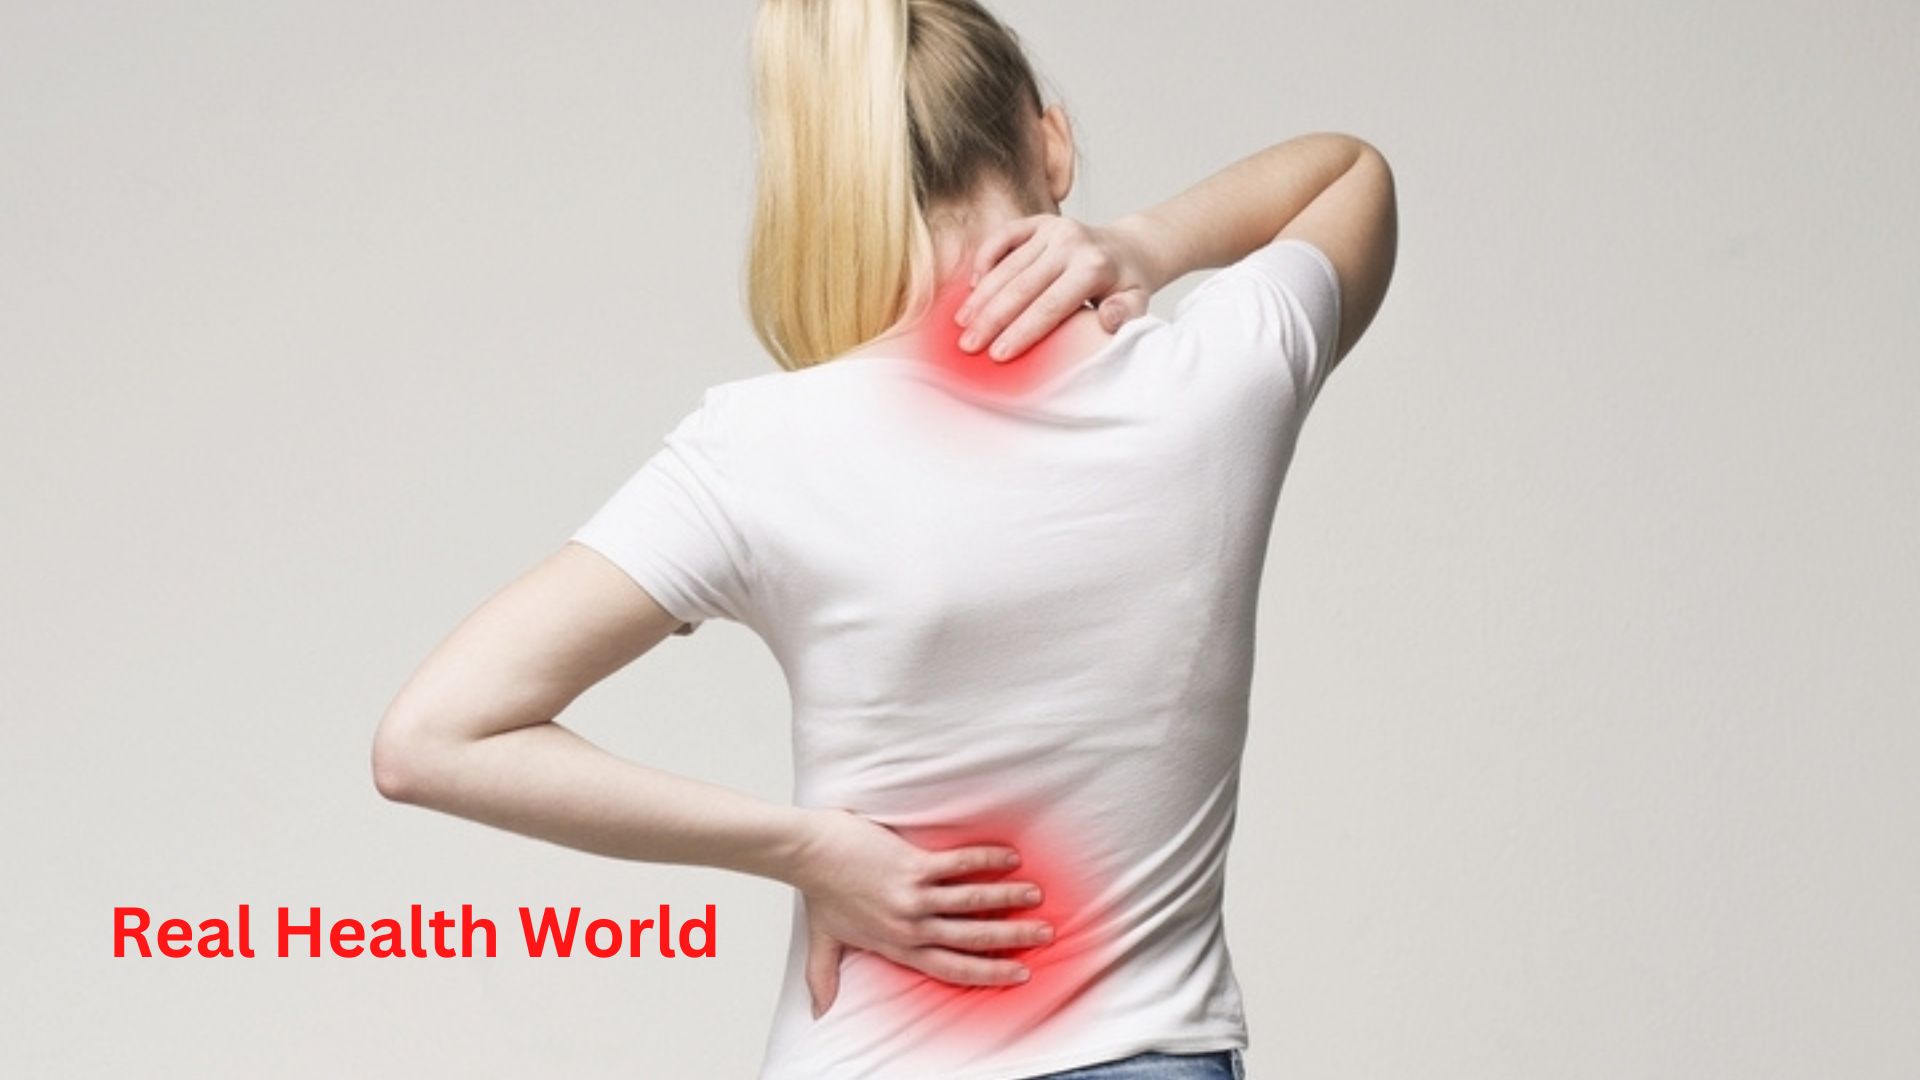 No worries about back pain